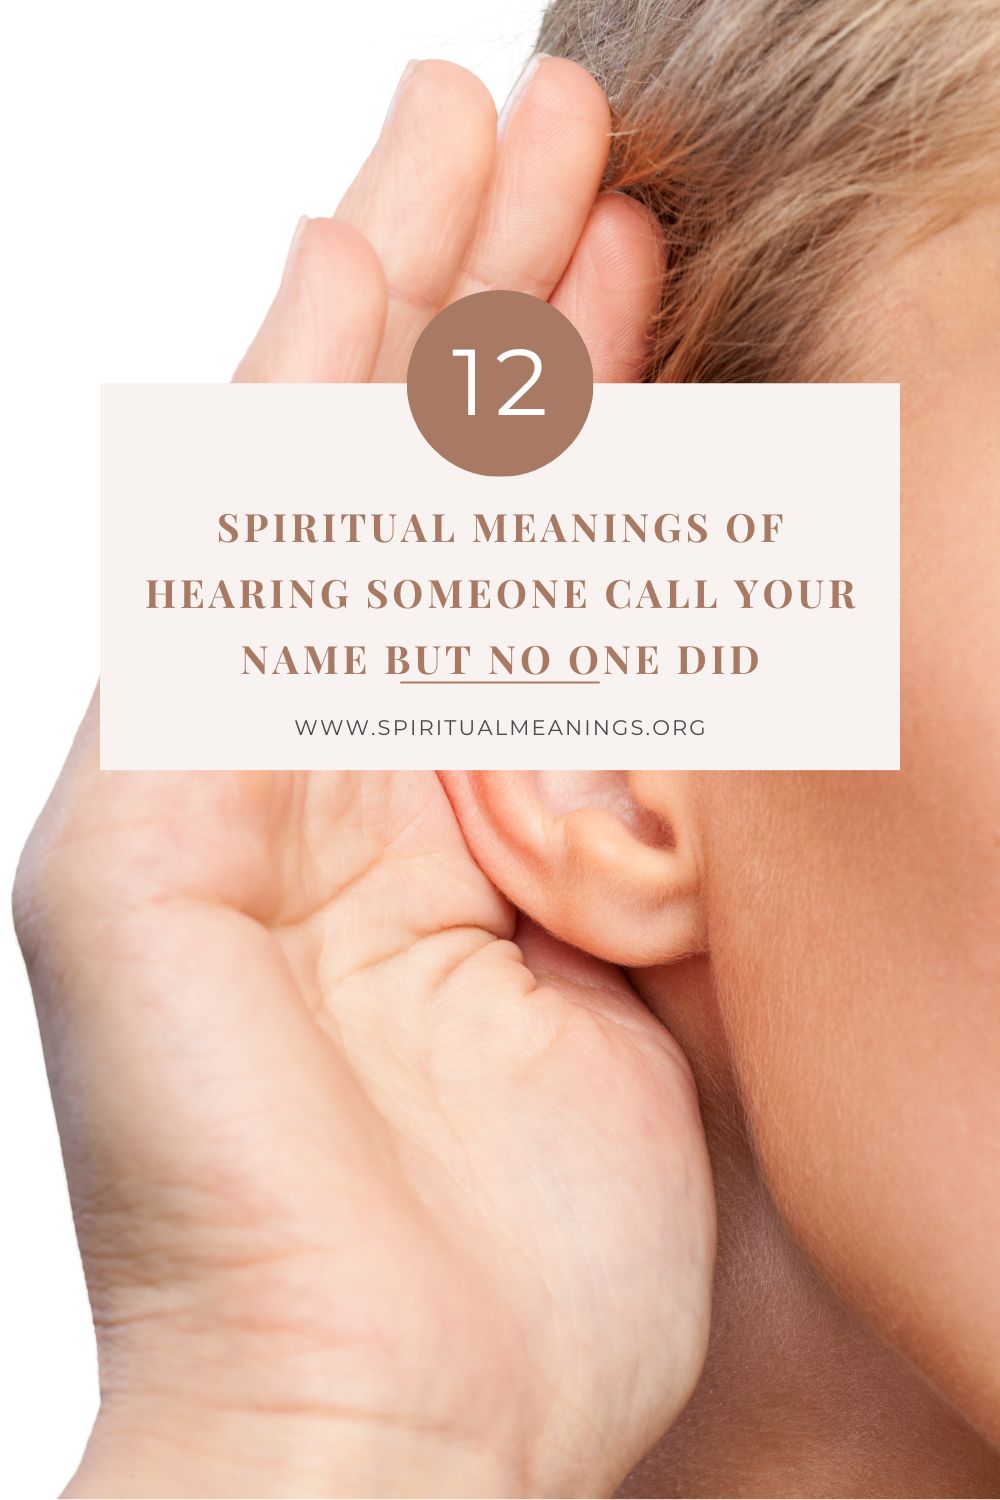 Spiritual Meanings of Hearing Someone Call Your Name But No One Did